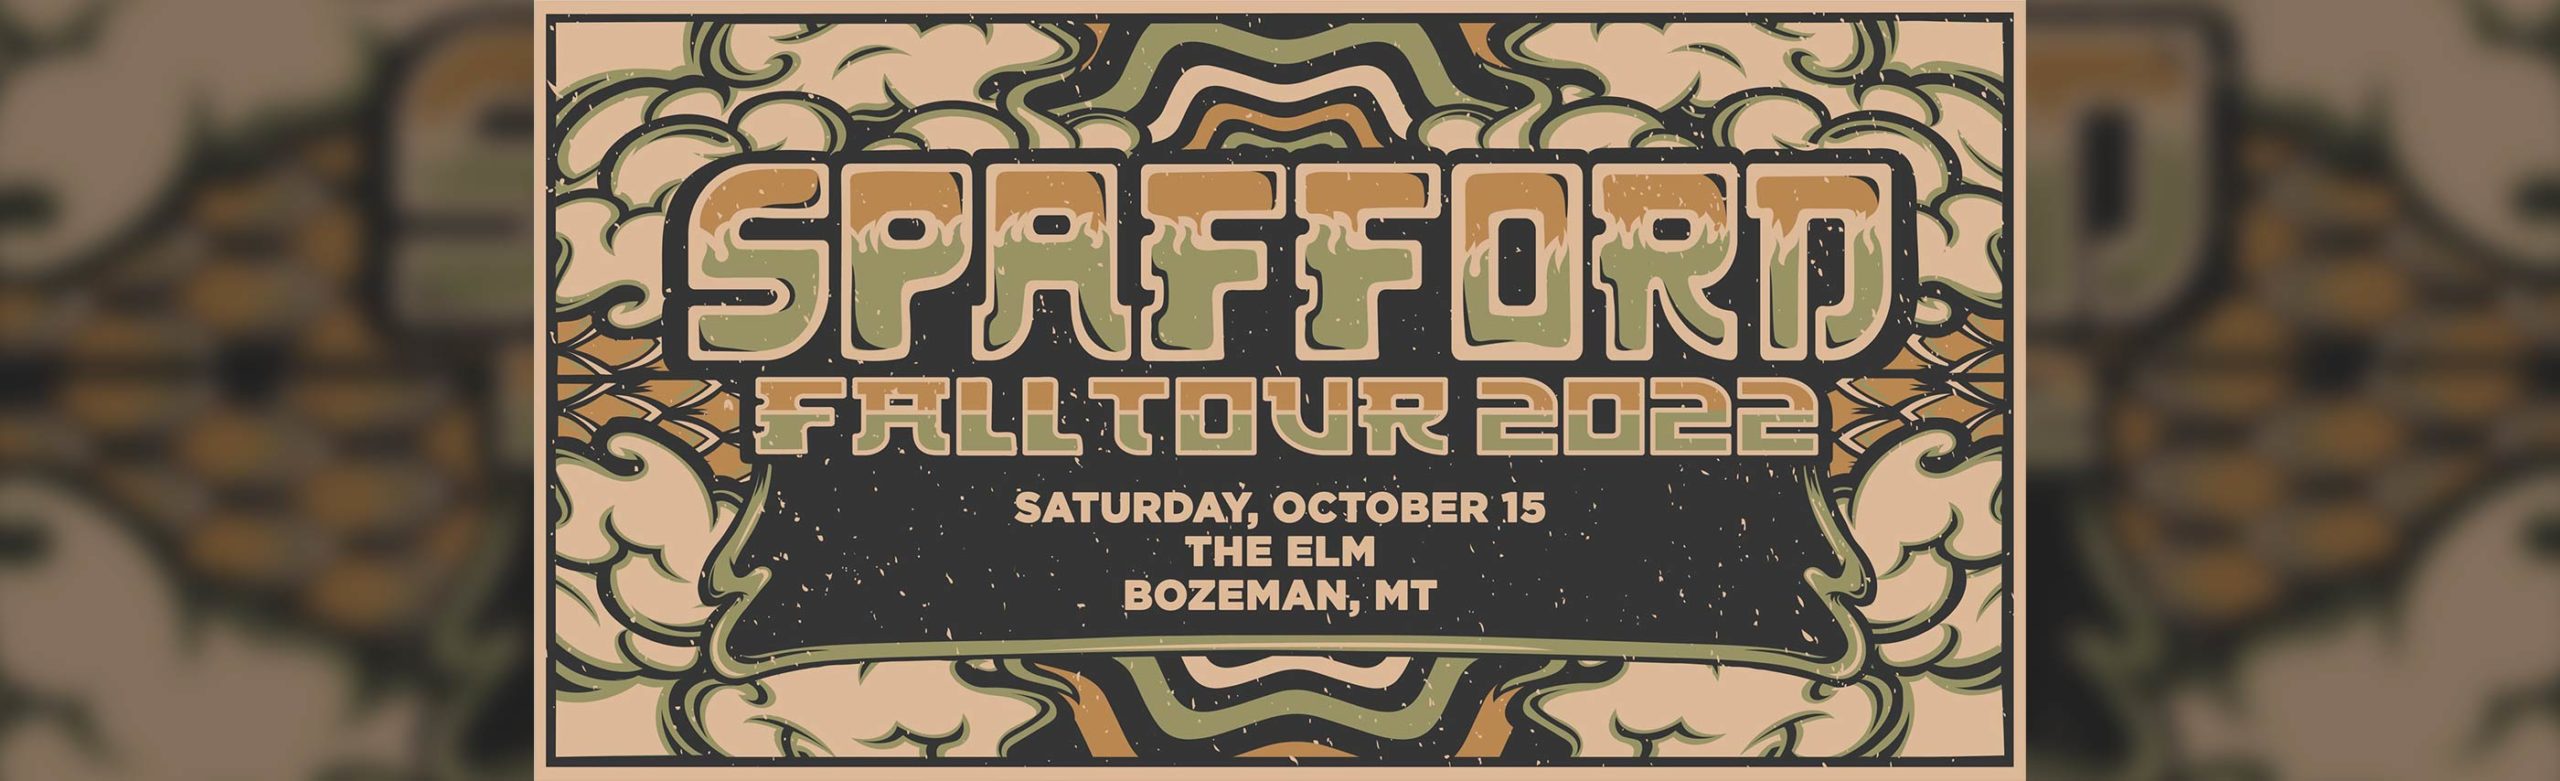 Spafford Announces Bozeman Concert in Fall 2022 Image